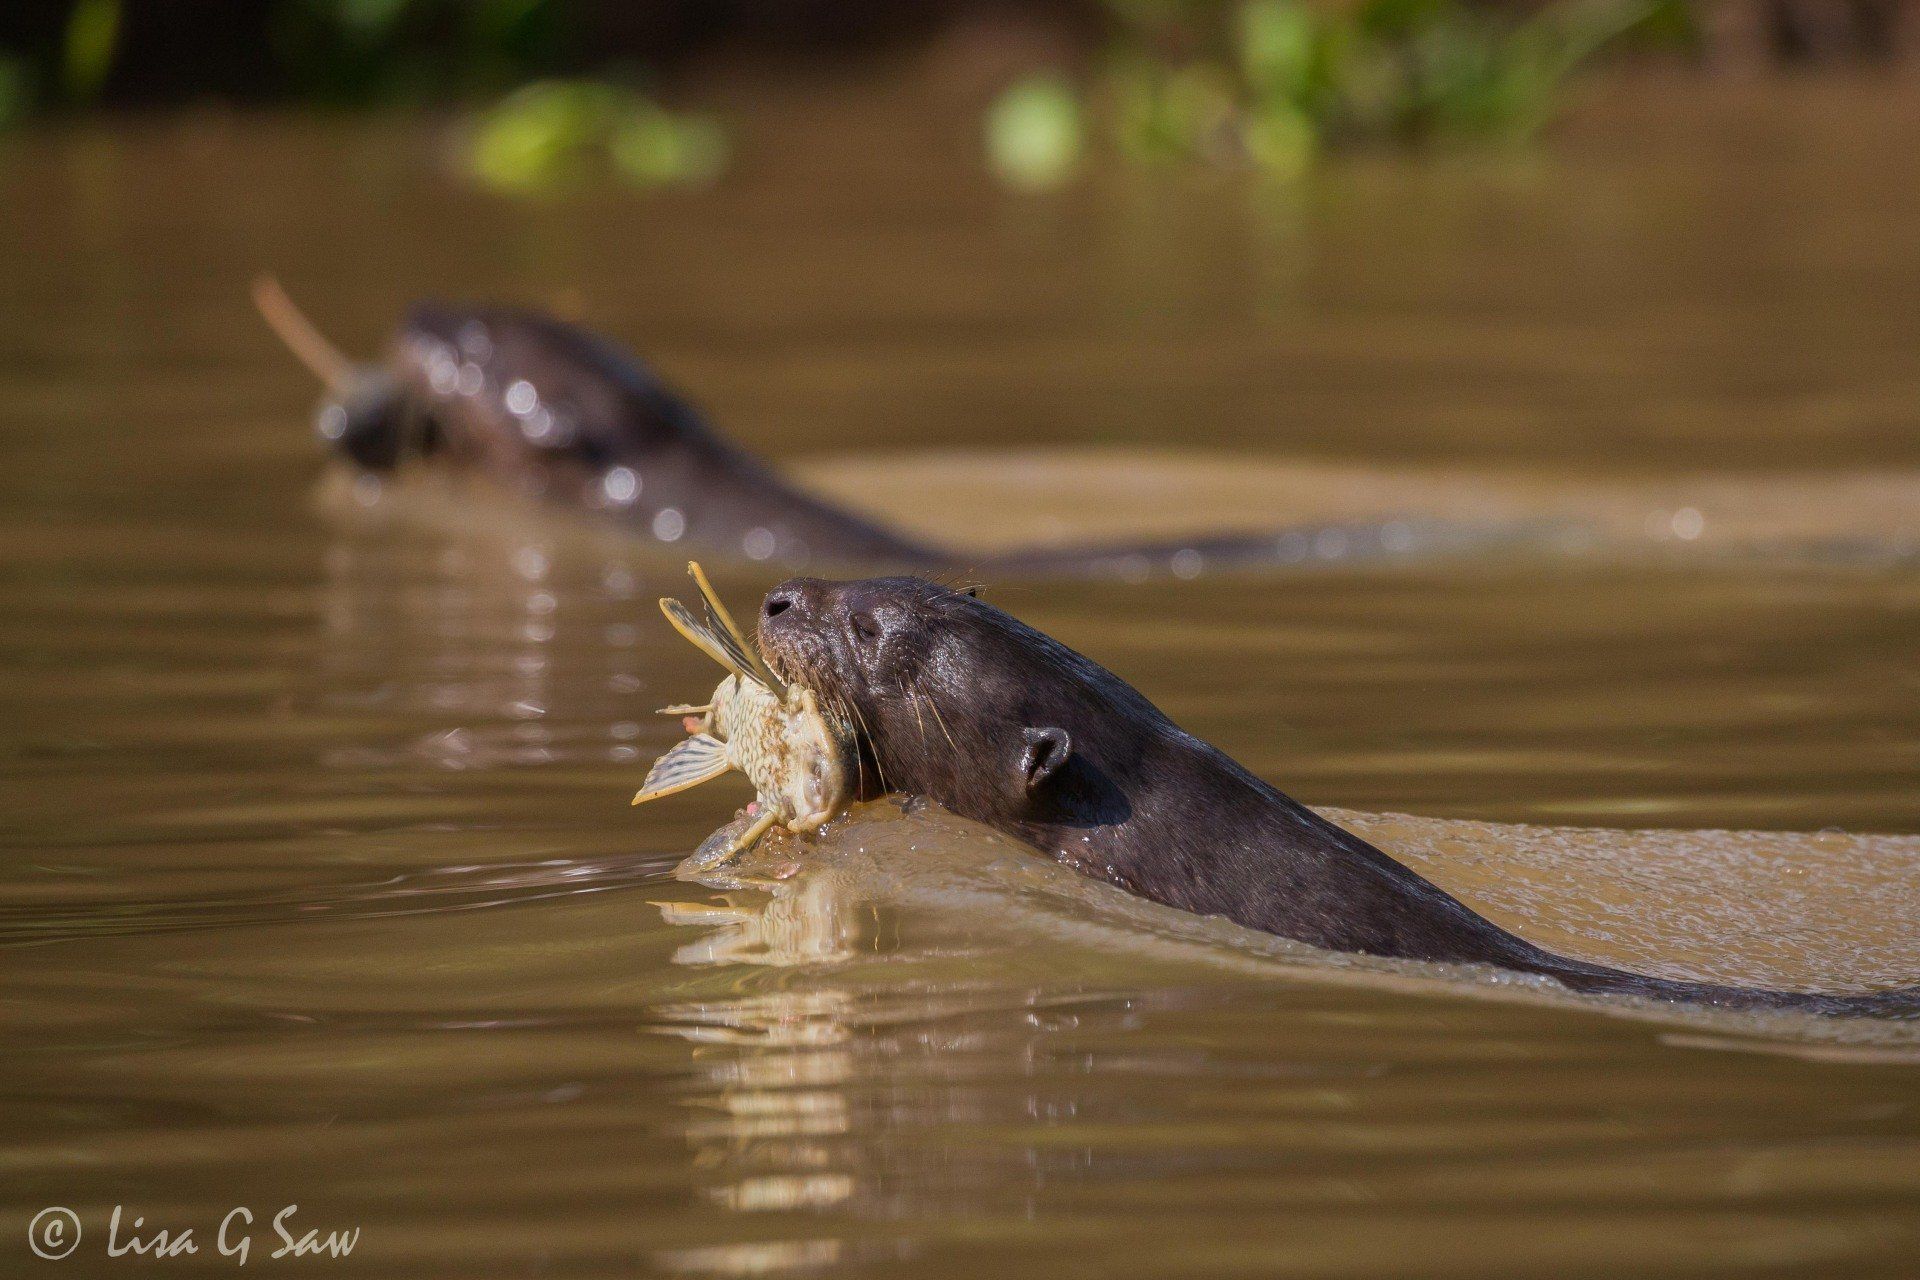 Two Giant River Otters swimming side by side with Catfish in mouth